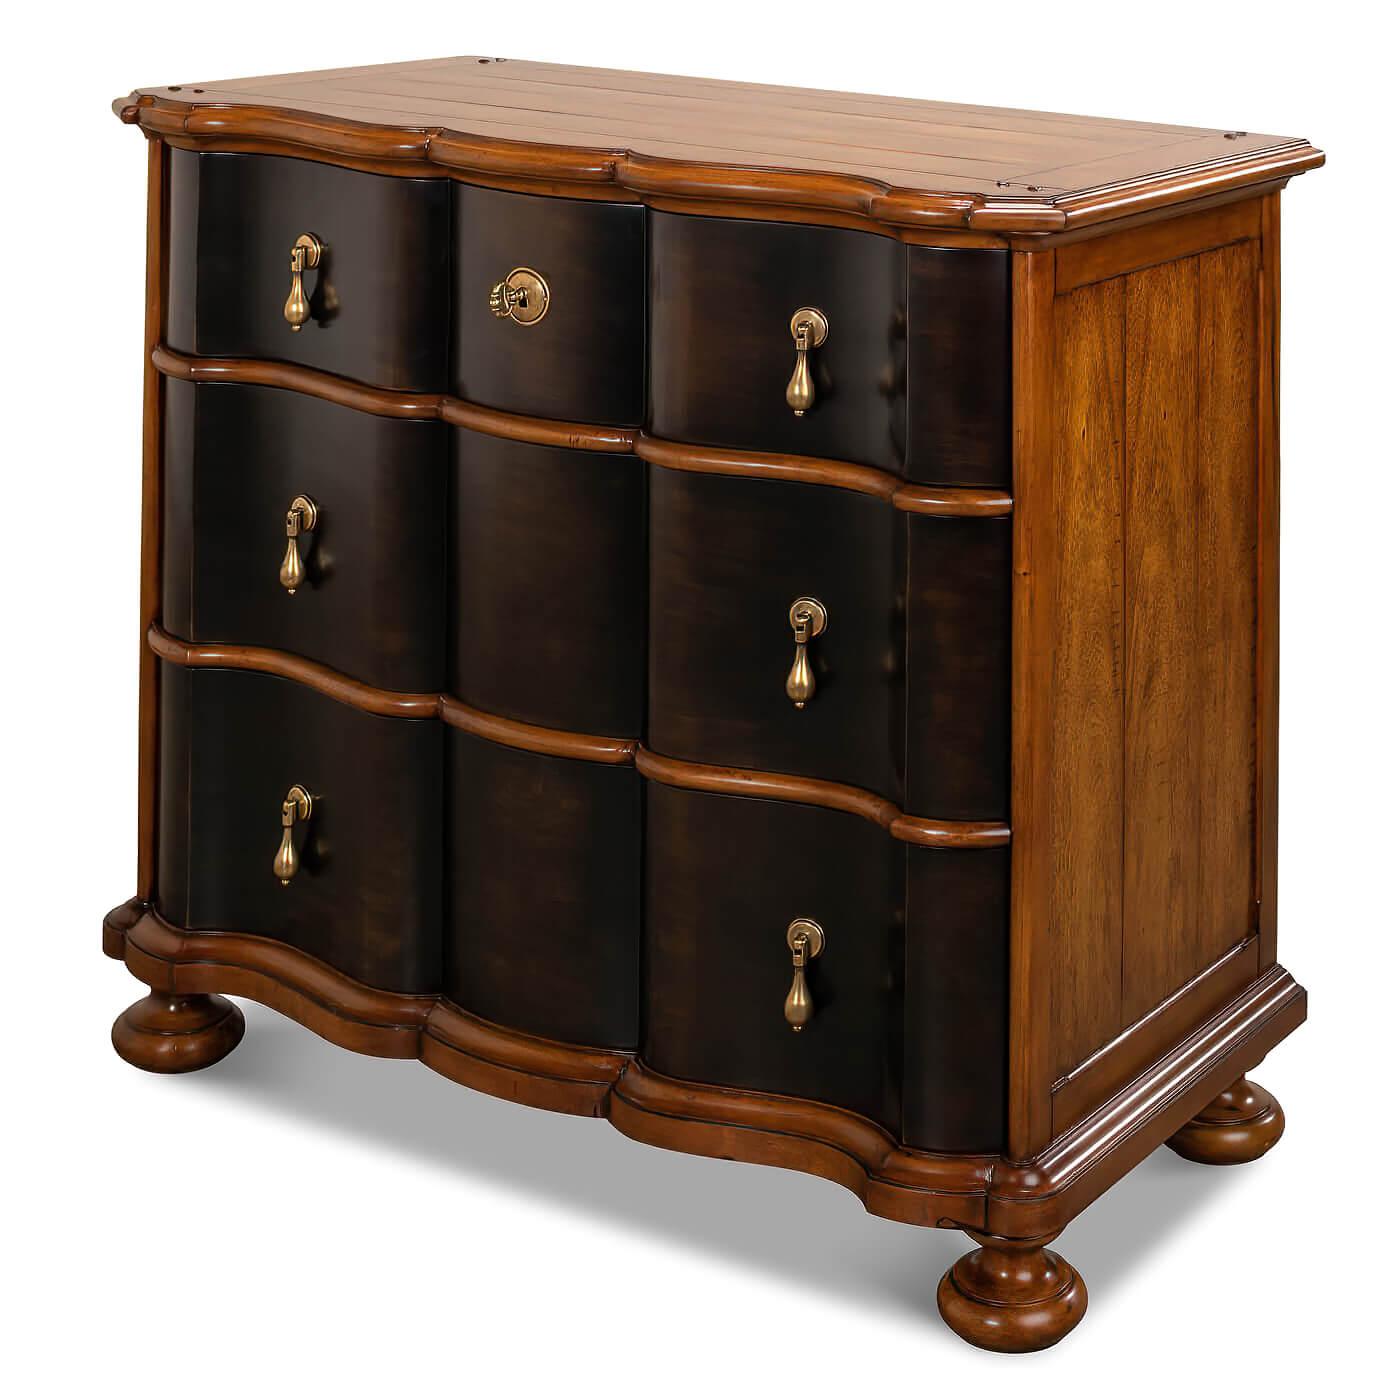 European-style walnut and ebonized chest of drawers, crafted in walnut with a finely figured top. This chest has three shaped drawers with an ebonized front. Each drawer has lovely cast brass 